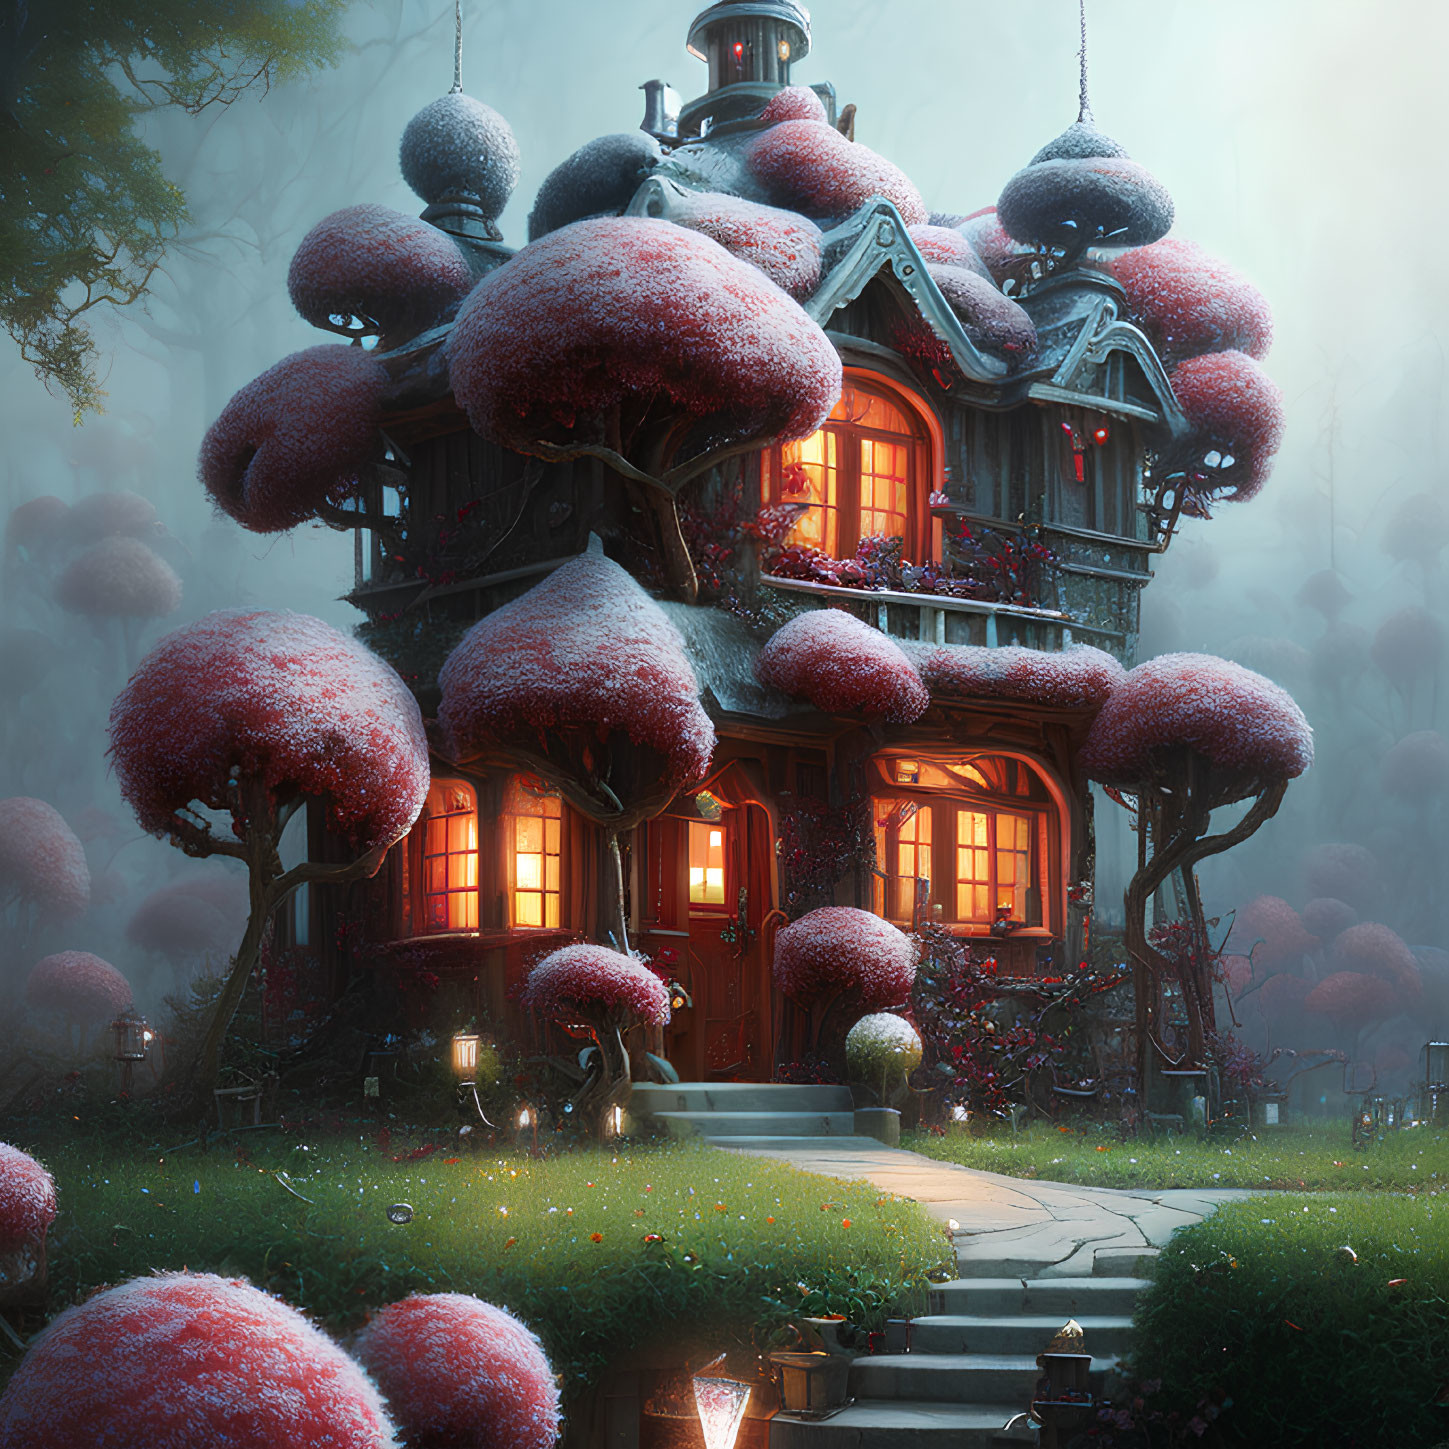 Fantasy two-story house among glowing mushrooms in misty forest